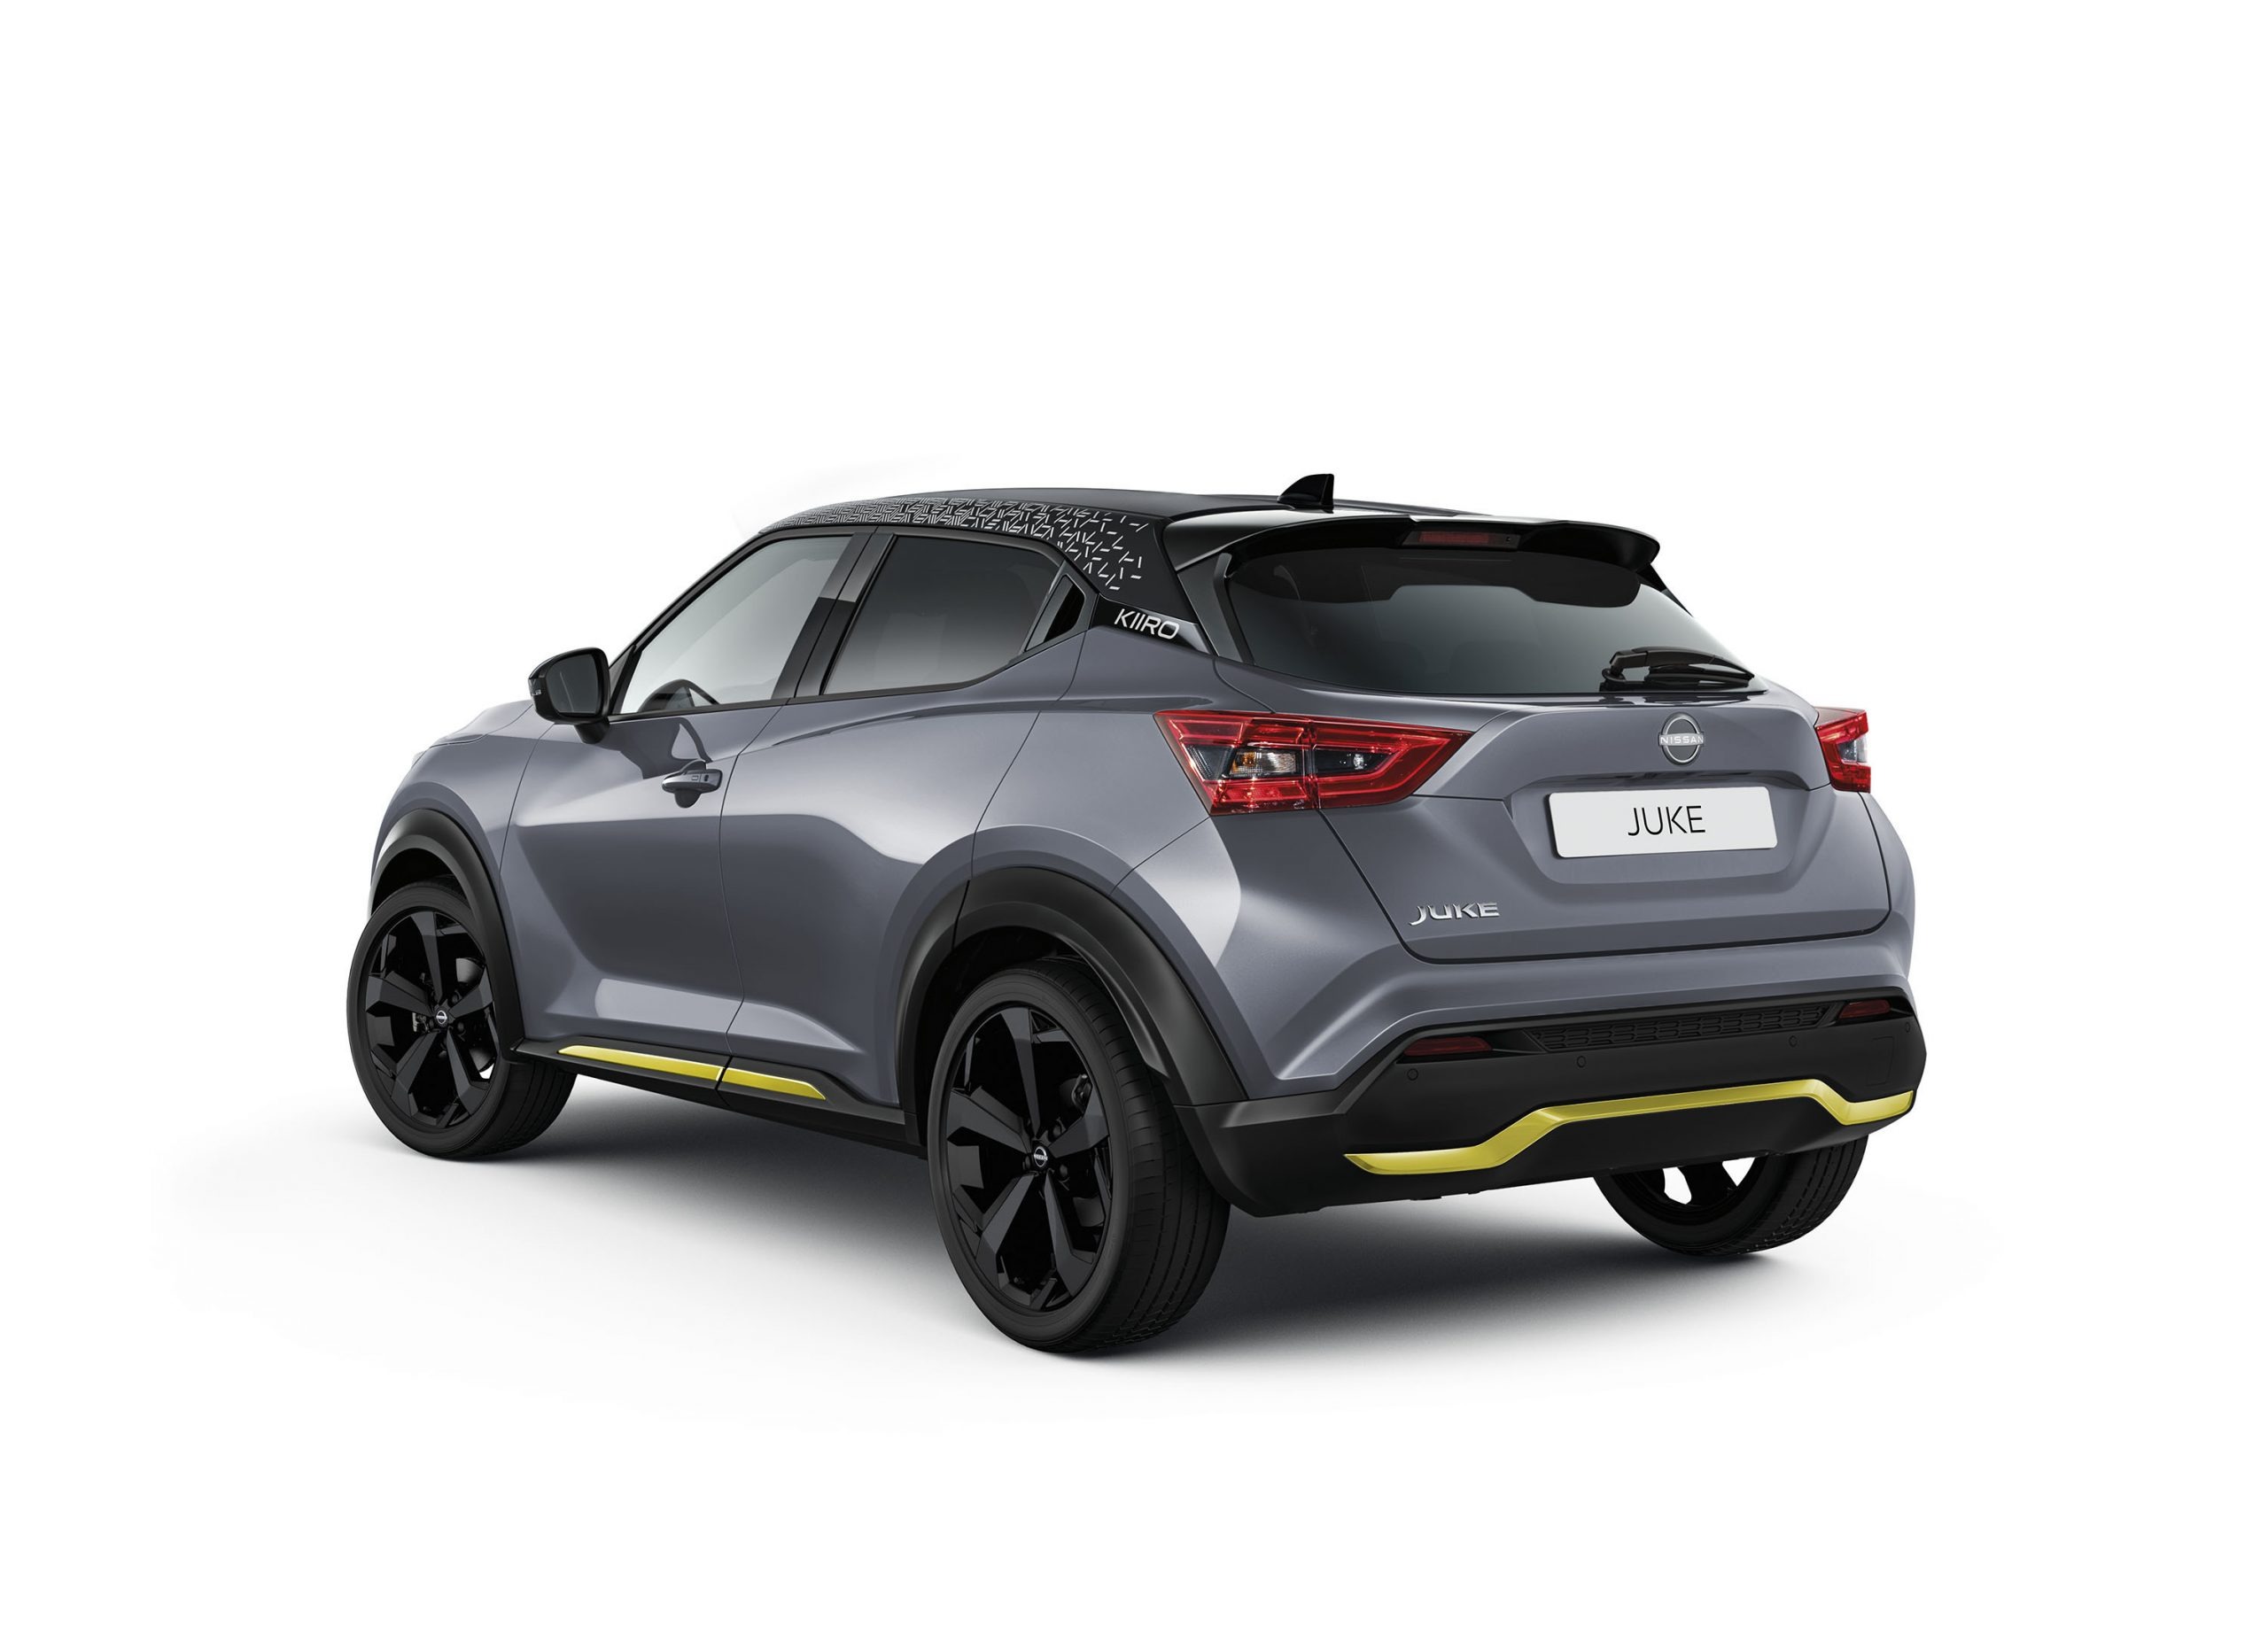 Nissan Juke Kiiro special version brings eye-catching sophistication to the small crossover segment